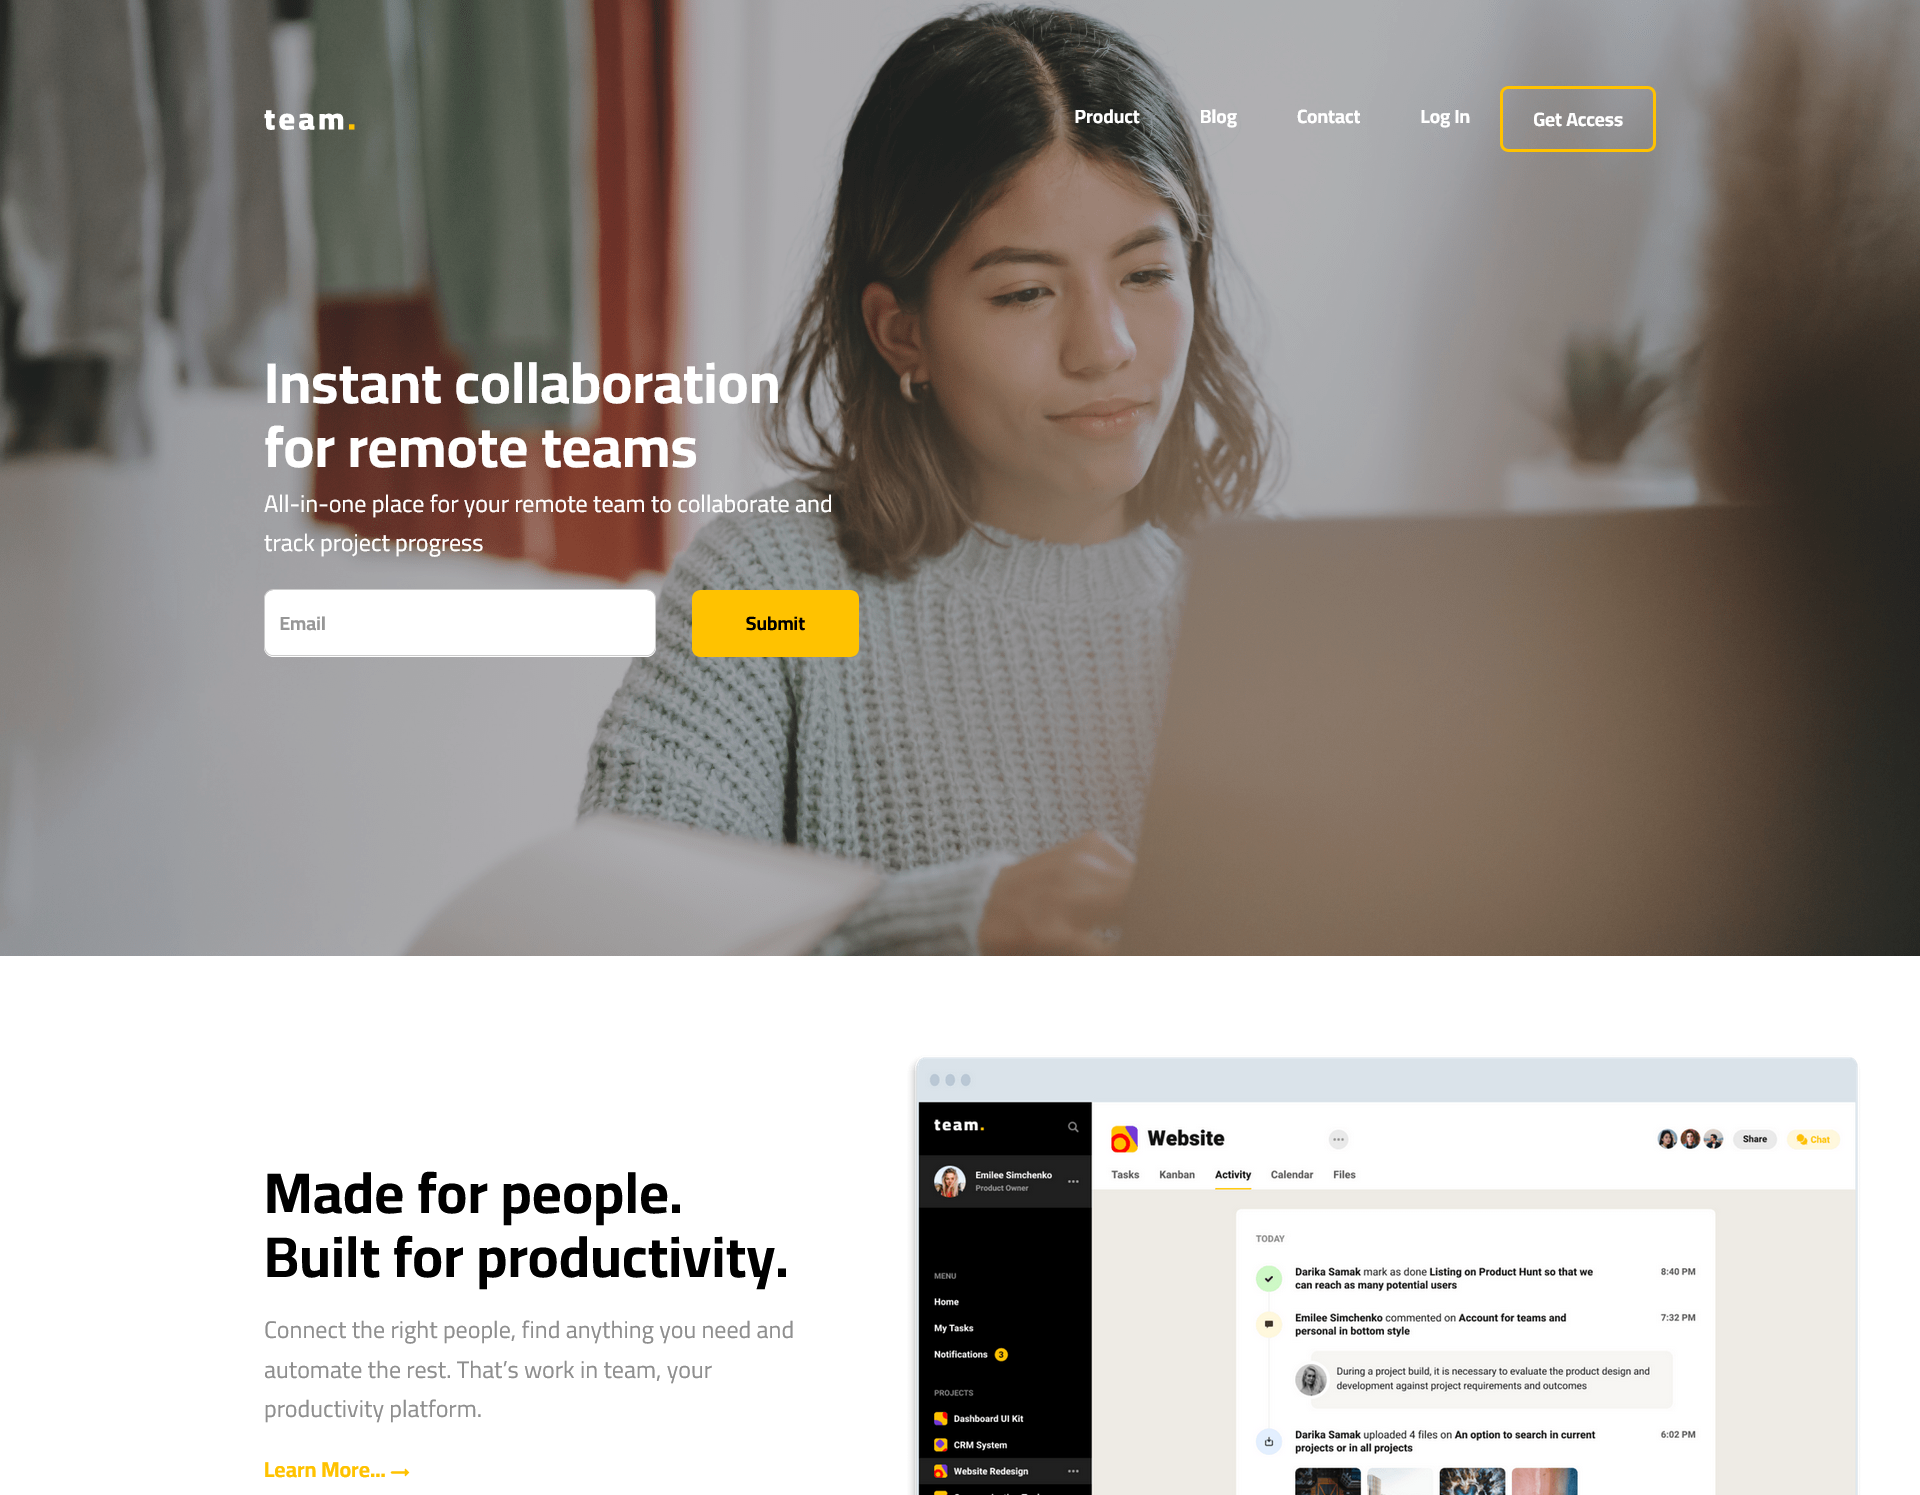 nN ~ —_— cE

Instant collaboration
for remote teams

All=in-one place for your remote team to collaborate and

track project progress

Made for people.

Built for productivity.

Connect the right people, find anything you need and

mate the rest. That's work in team, your

uctivity platform